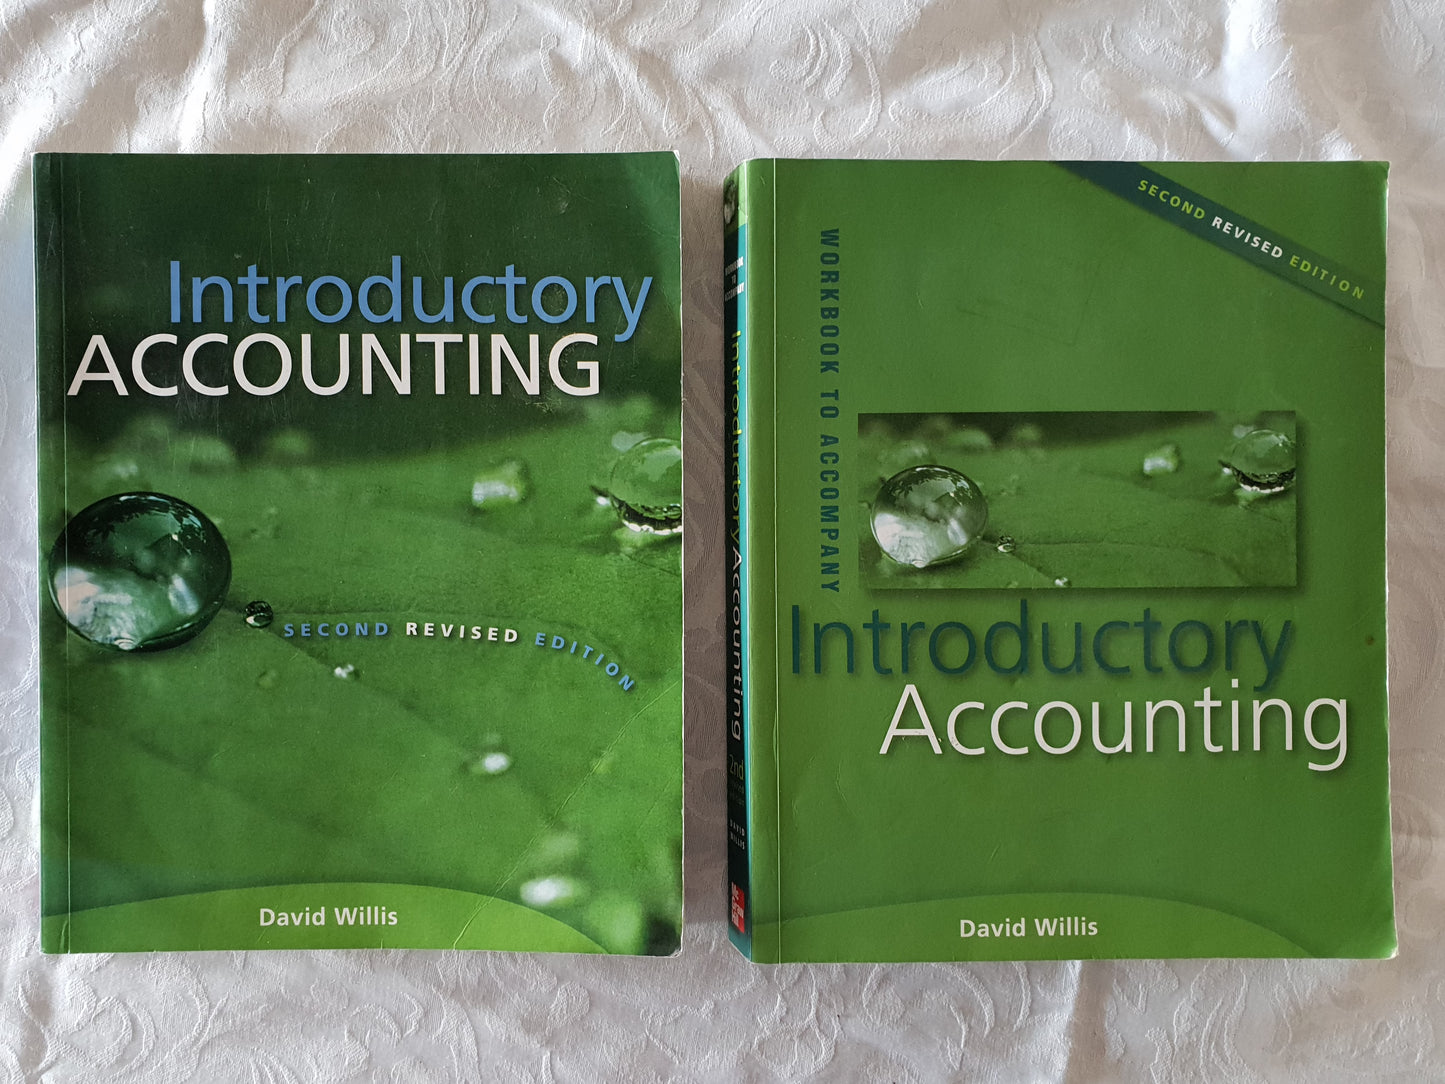 Introductory Accounting - Second Revised Edition  Includes  Workbook to Accompany - Second Revised Edition  by David Willis